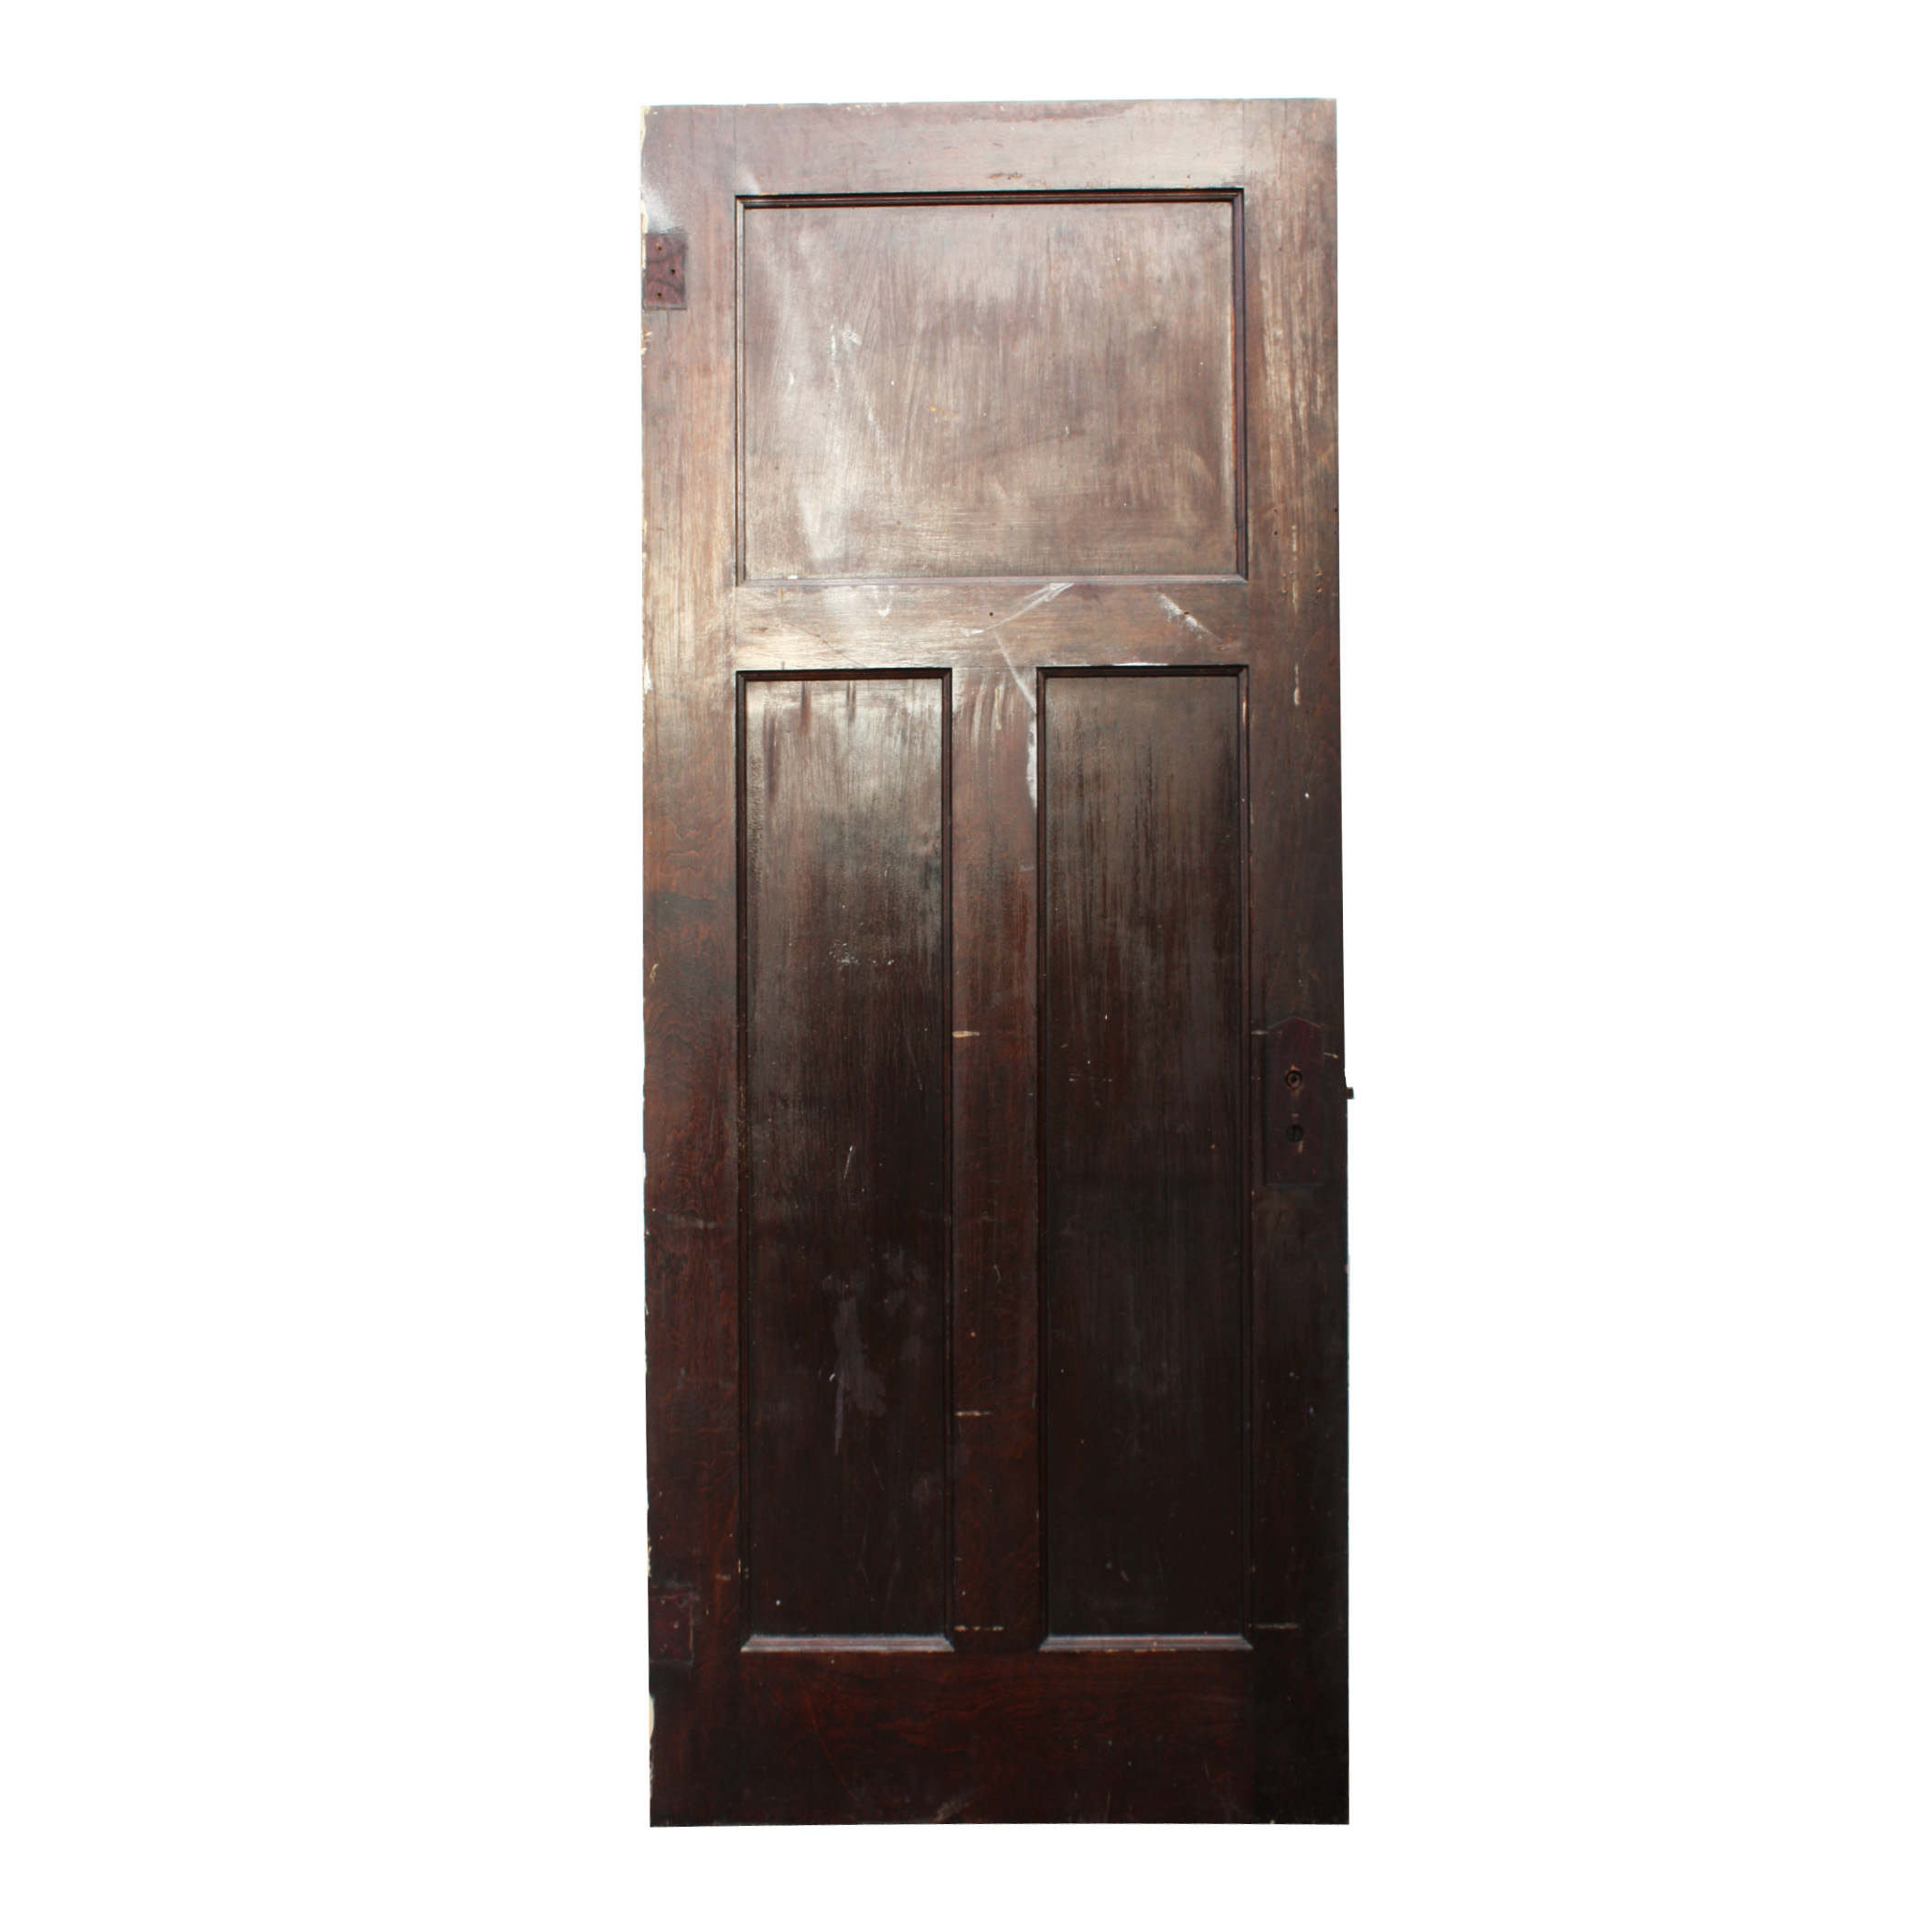 Antique Three-Panel Solid Wood Door, Stained Finish-37198